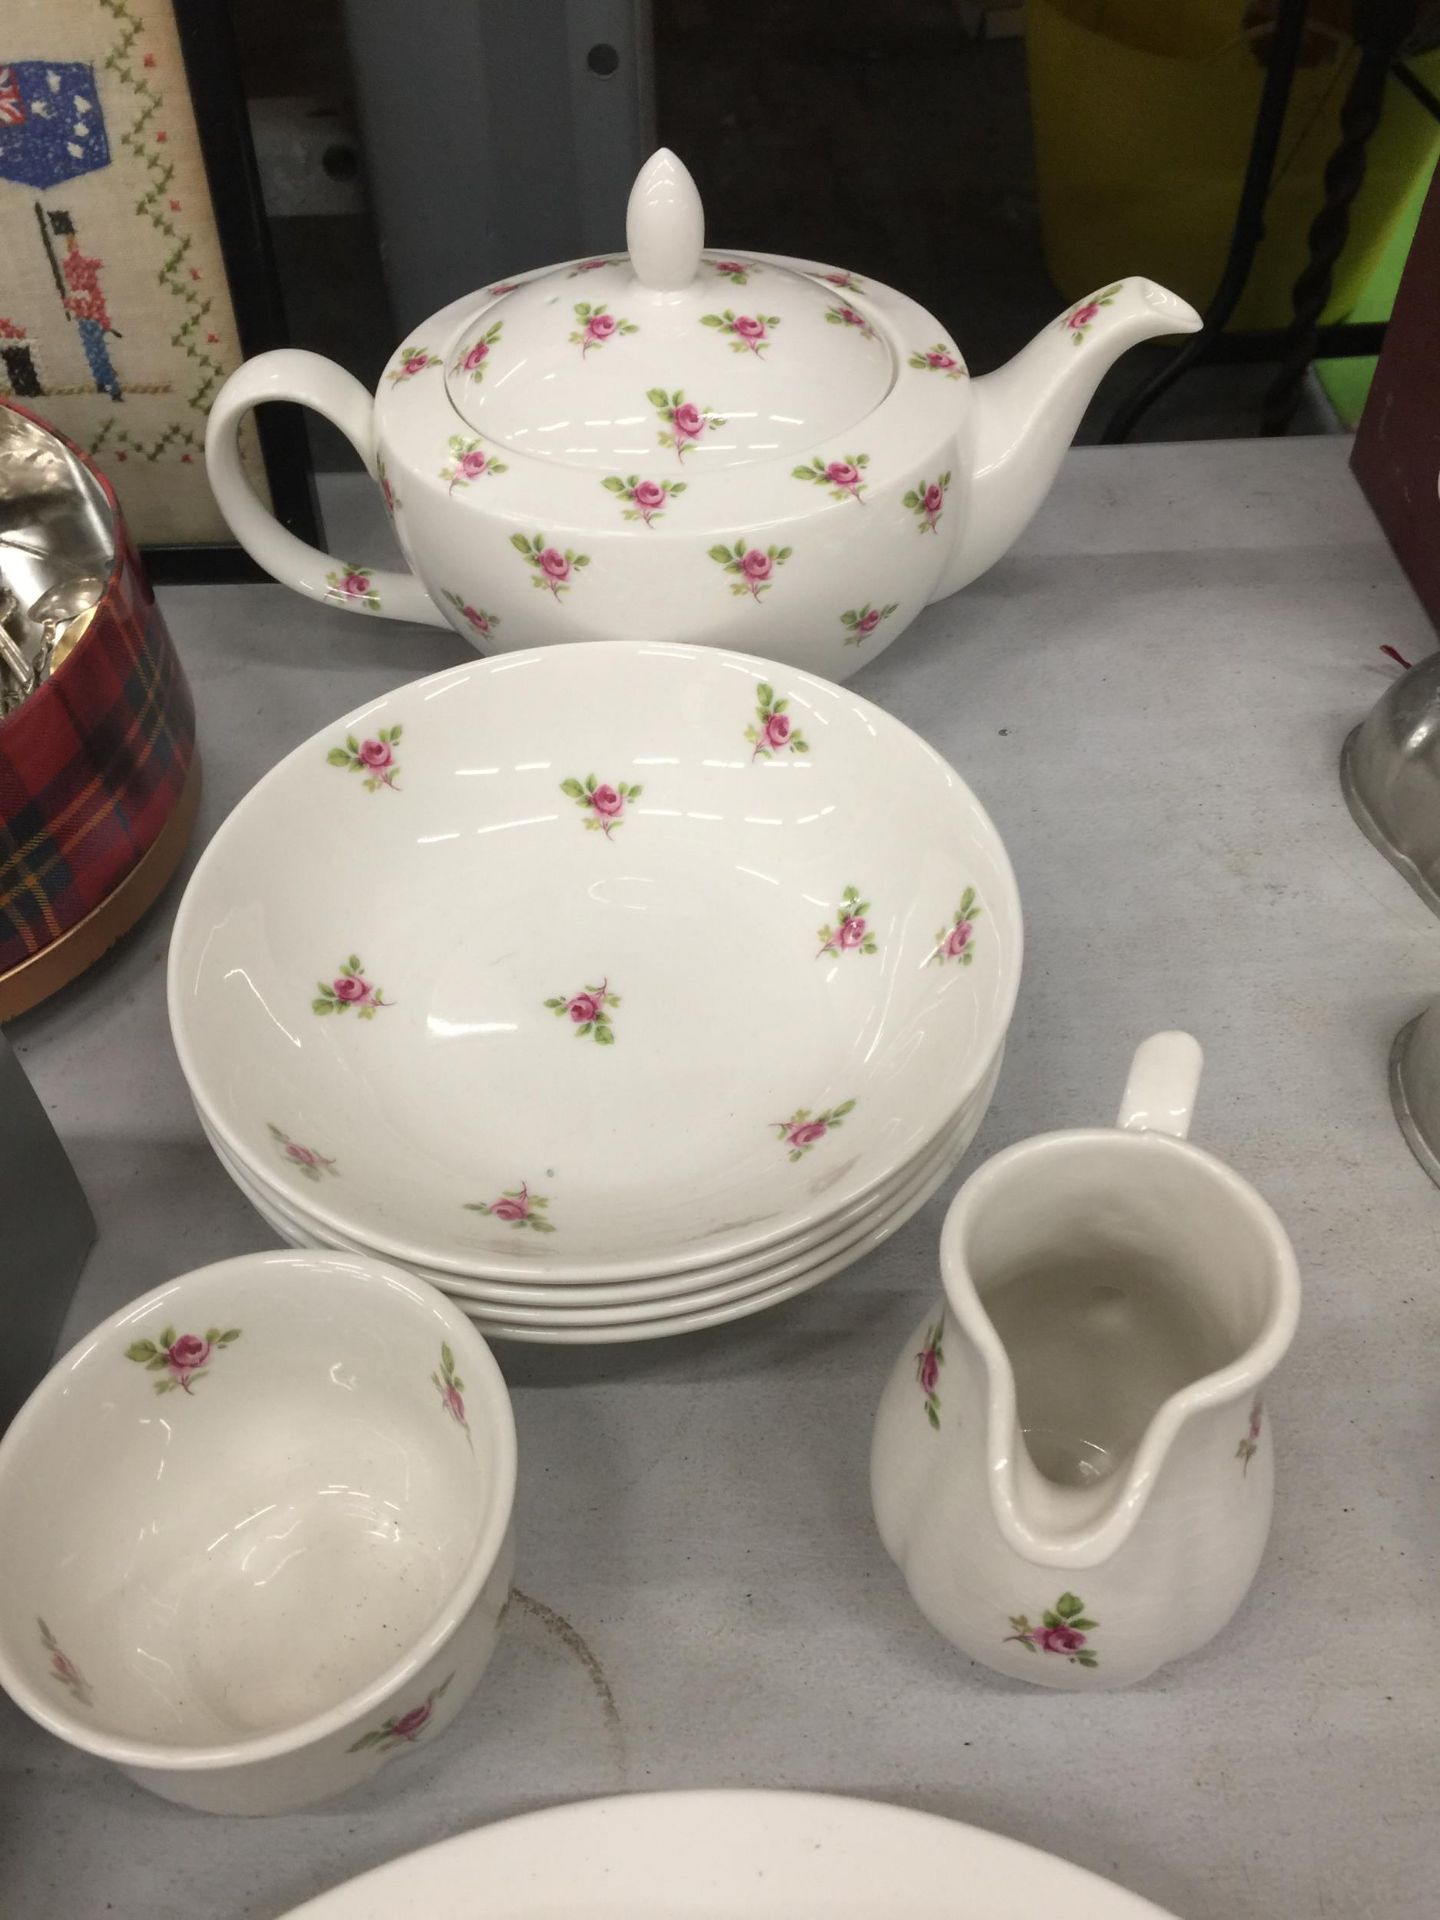 A QUANTITY OF CHINA TEAWARE TO INCLUDE PLATES, BOWLS, A TEAPOT, CREAM JUG AND SUGAR BOWL - Image 2 of 3